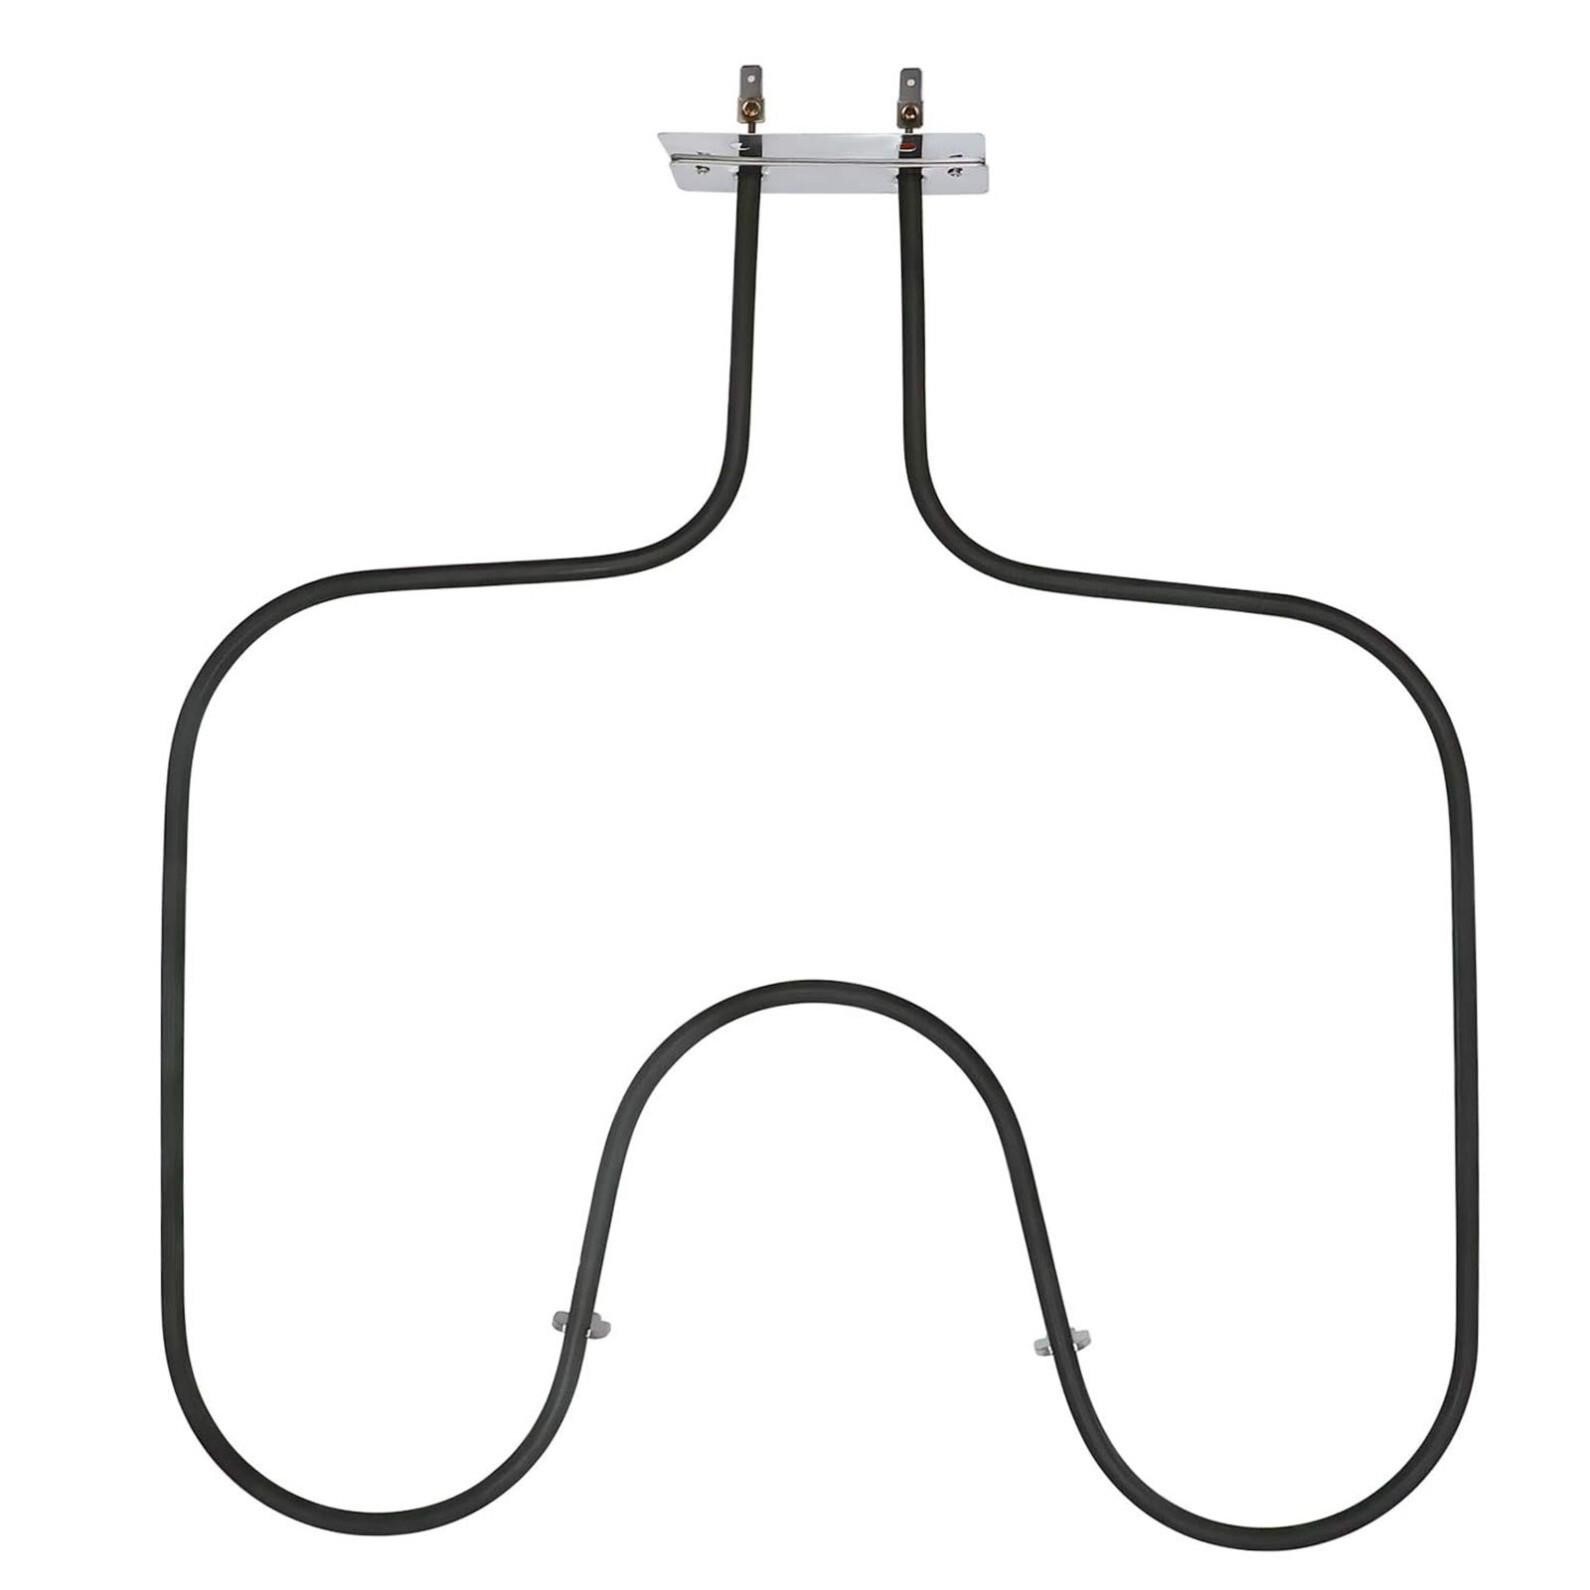 Beaquicy W10207397 Oven Bake Element - Replacement